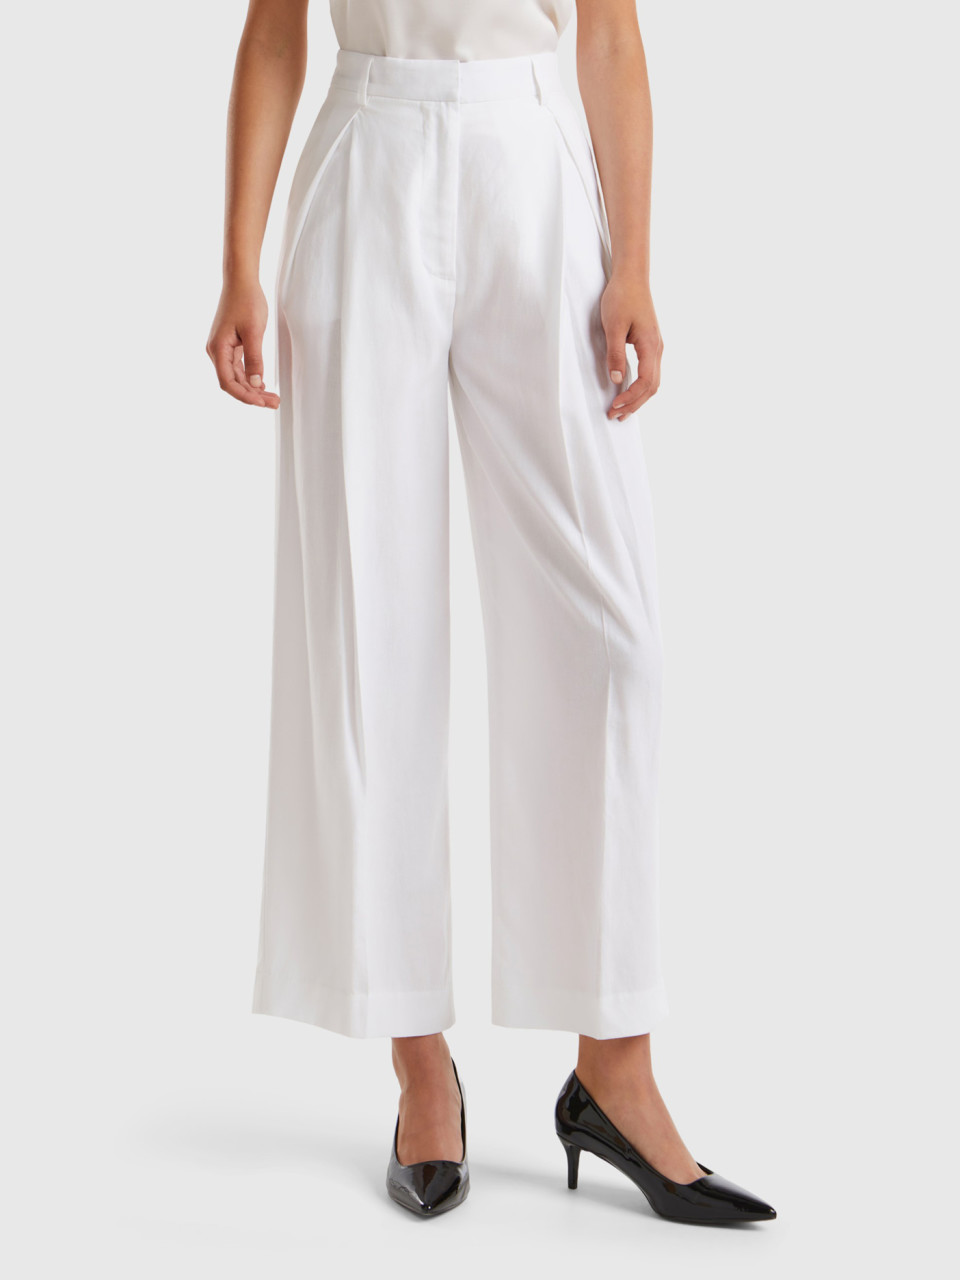 Benetton, Trousers In Sustainable Viscose, White, Women